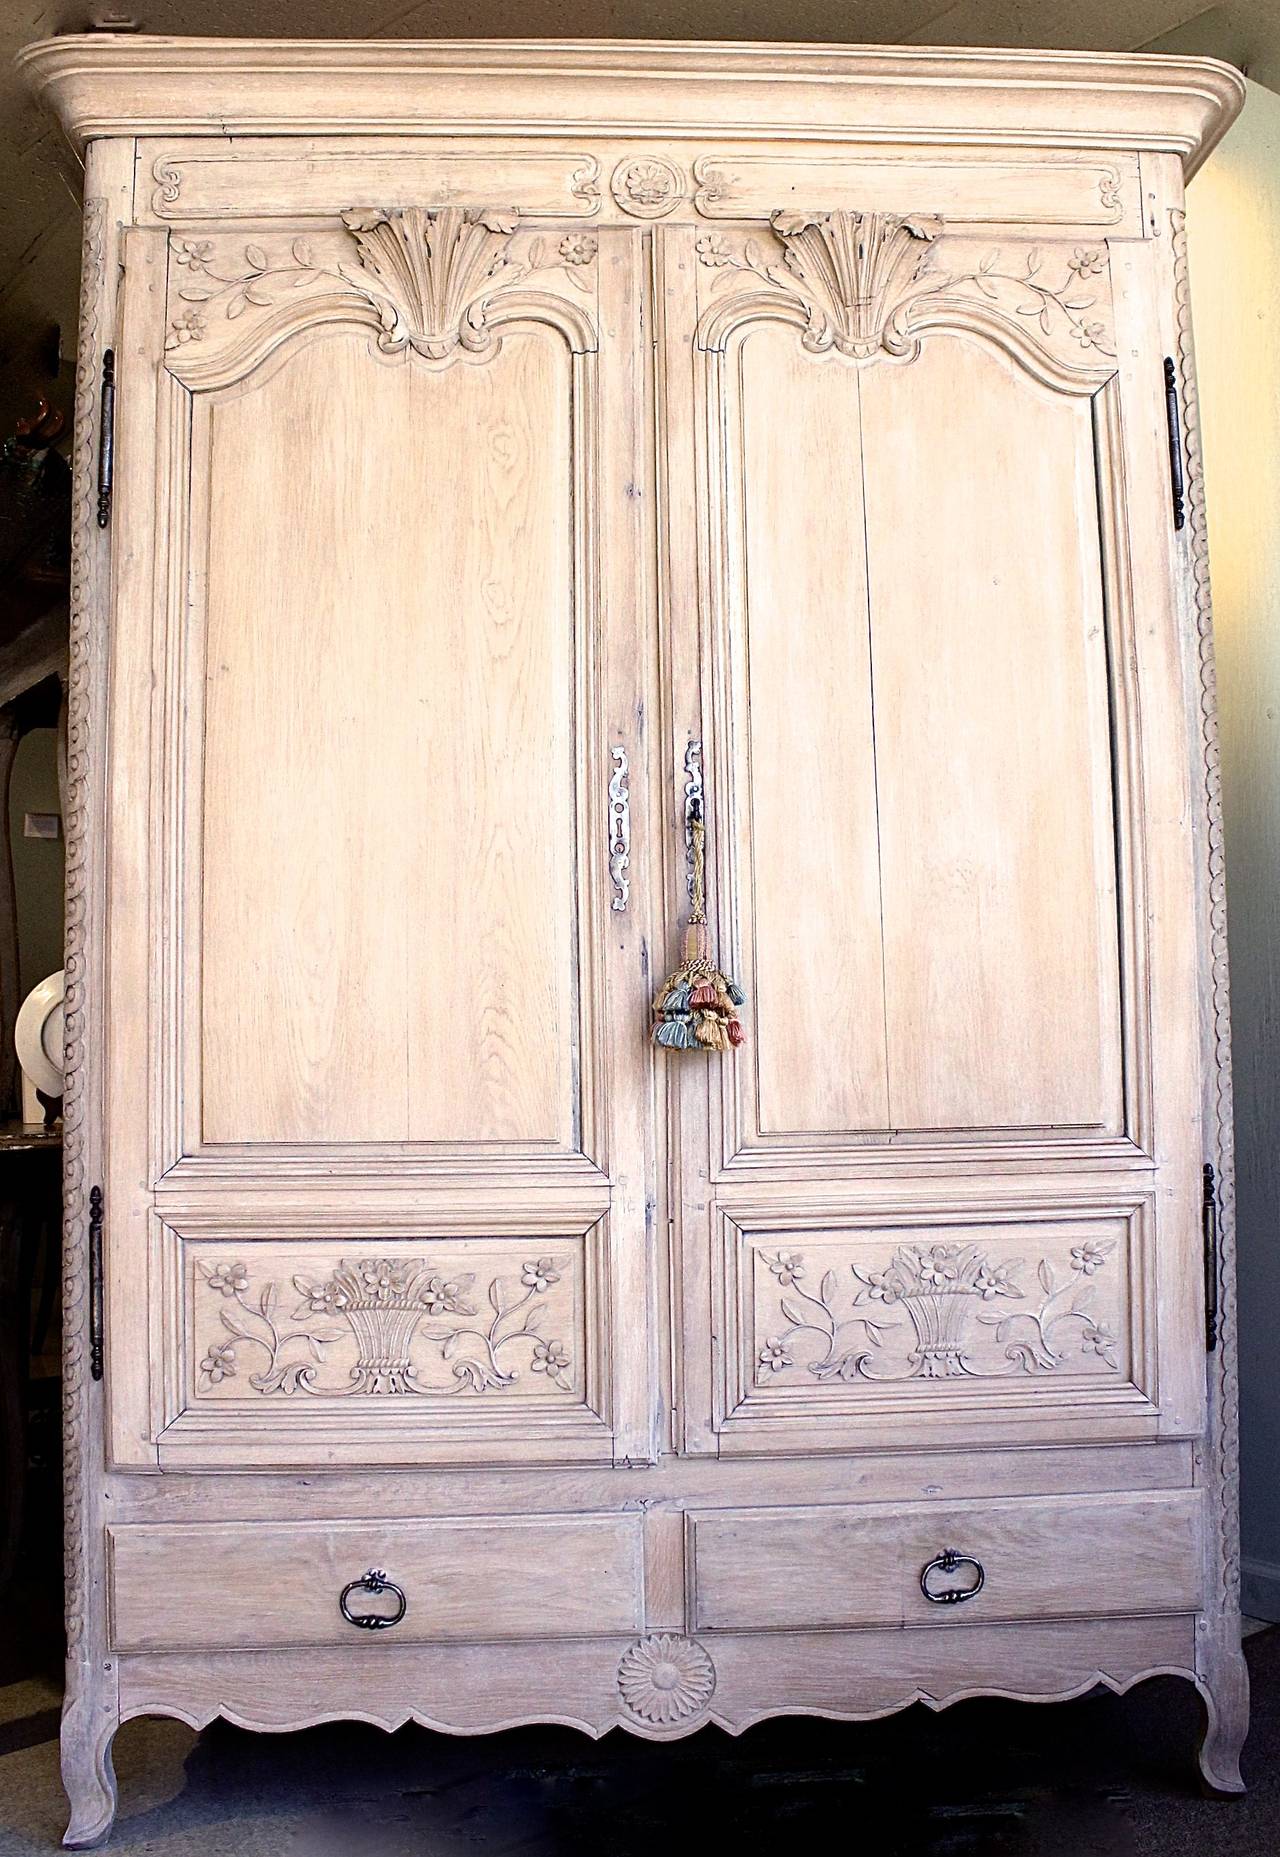 A handsome armoire with a subtle finish of stripped and transparently white washed oak. Crisply carved symmetrical door panels are set off by bold acanthus crests and floral sprays. The curved corners are also nicely detailed with guilloche pattern